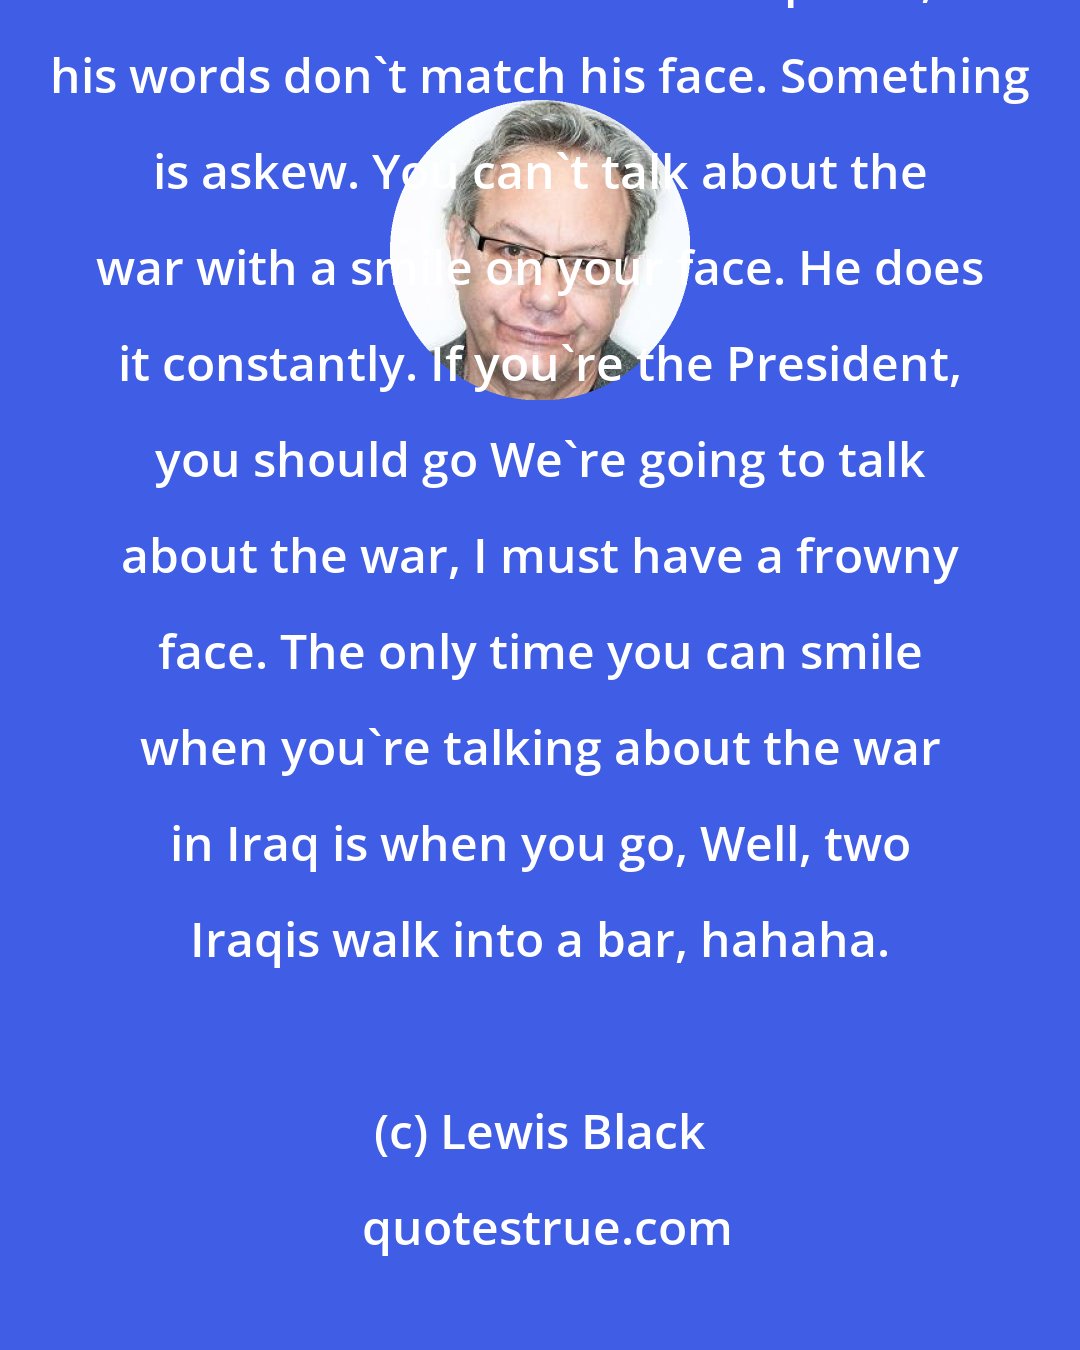 Lewis Black: Here's why I think there's something a little odd with George Bush. Because a lot of the times when he speaks, his words don't match his face. Something is askew. You can't talk about the war with a smile on your face. He does it constantly. If you're the President, you should go We're going to talk about the war, I must have a frowny face. The only time you can smile when you're talking about the war in Iraq is when you go, Well, two Iraqis walk into a bar, hahaha.